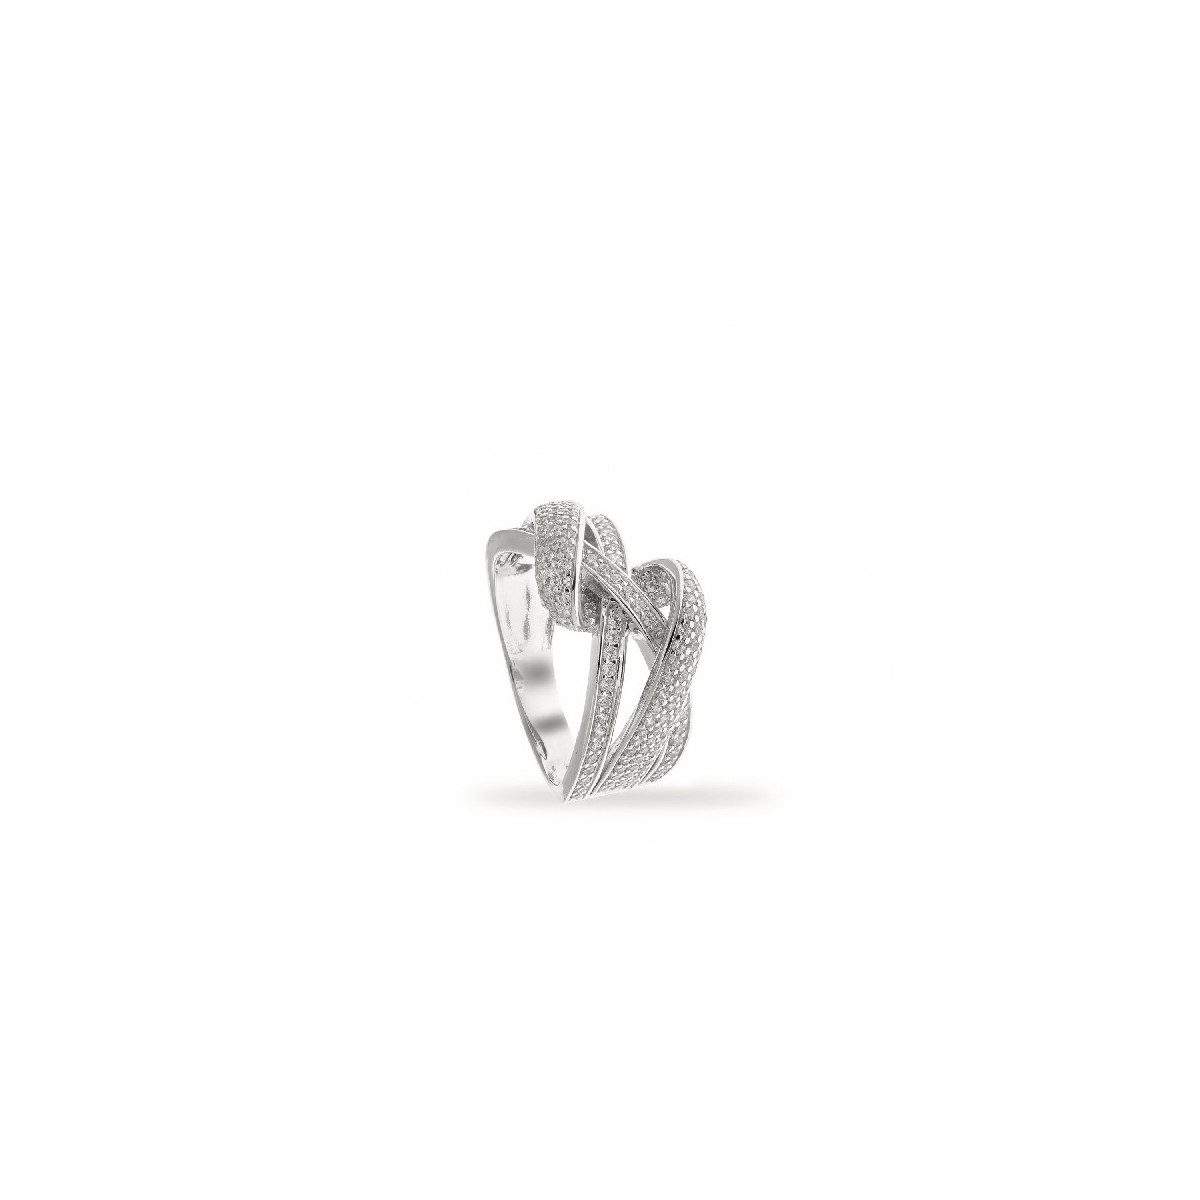 LINEARGENT RING - 18244-R